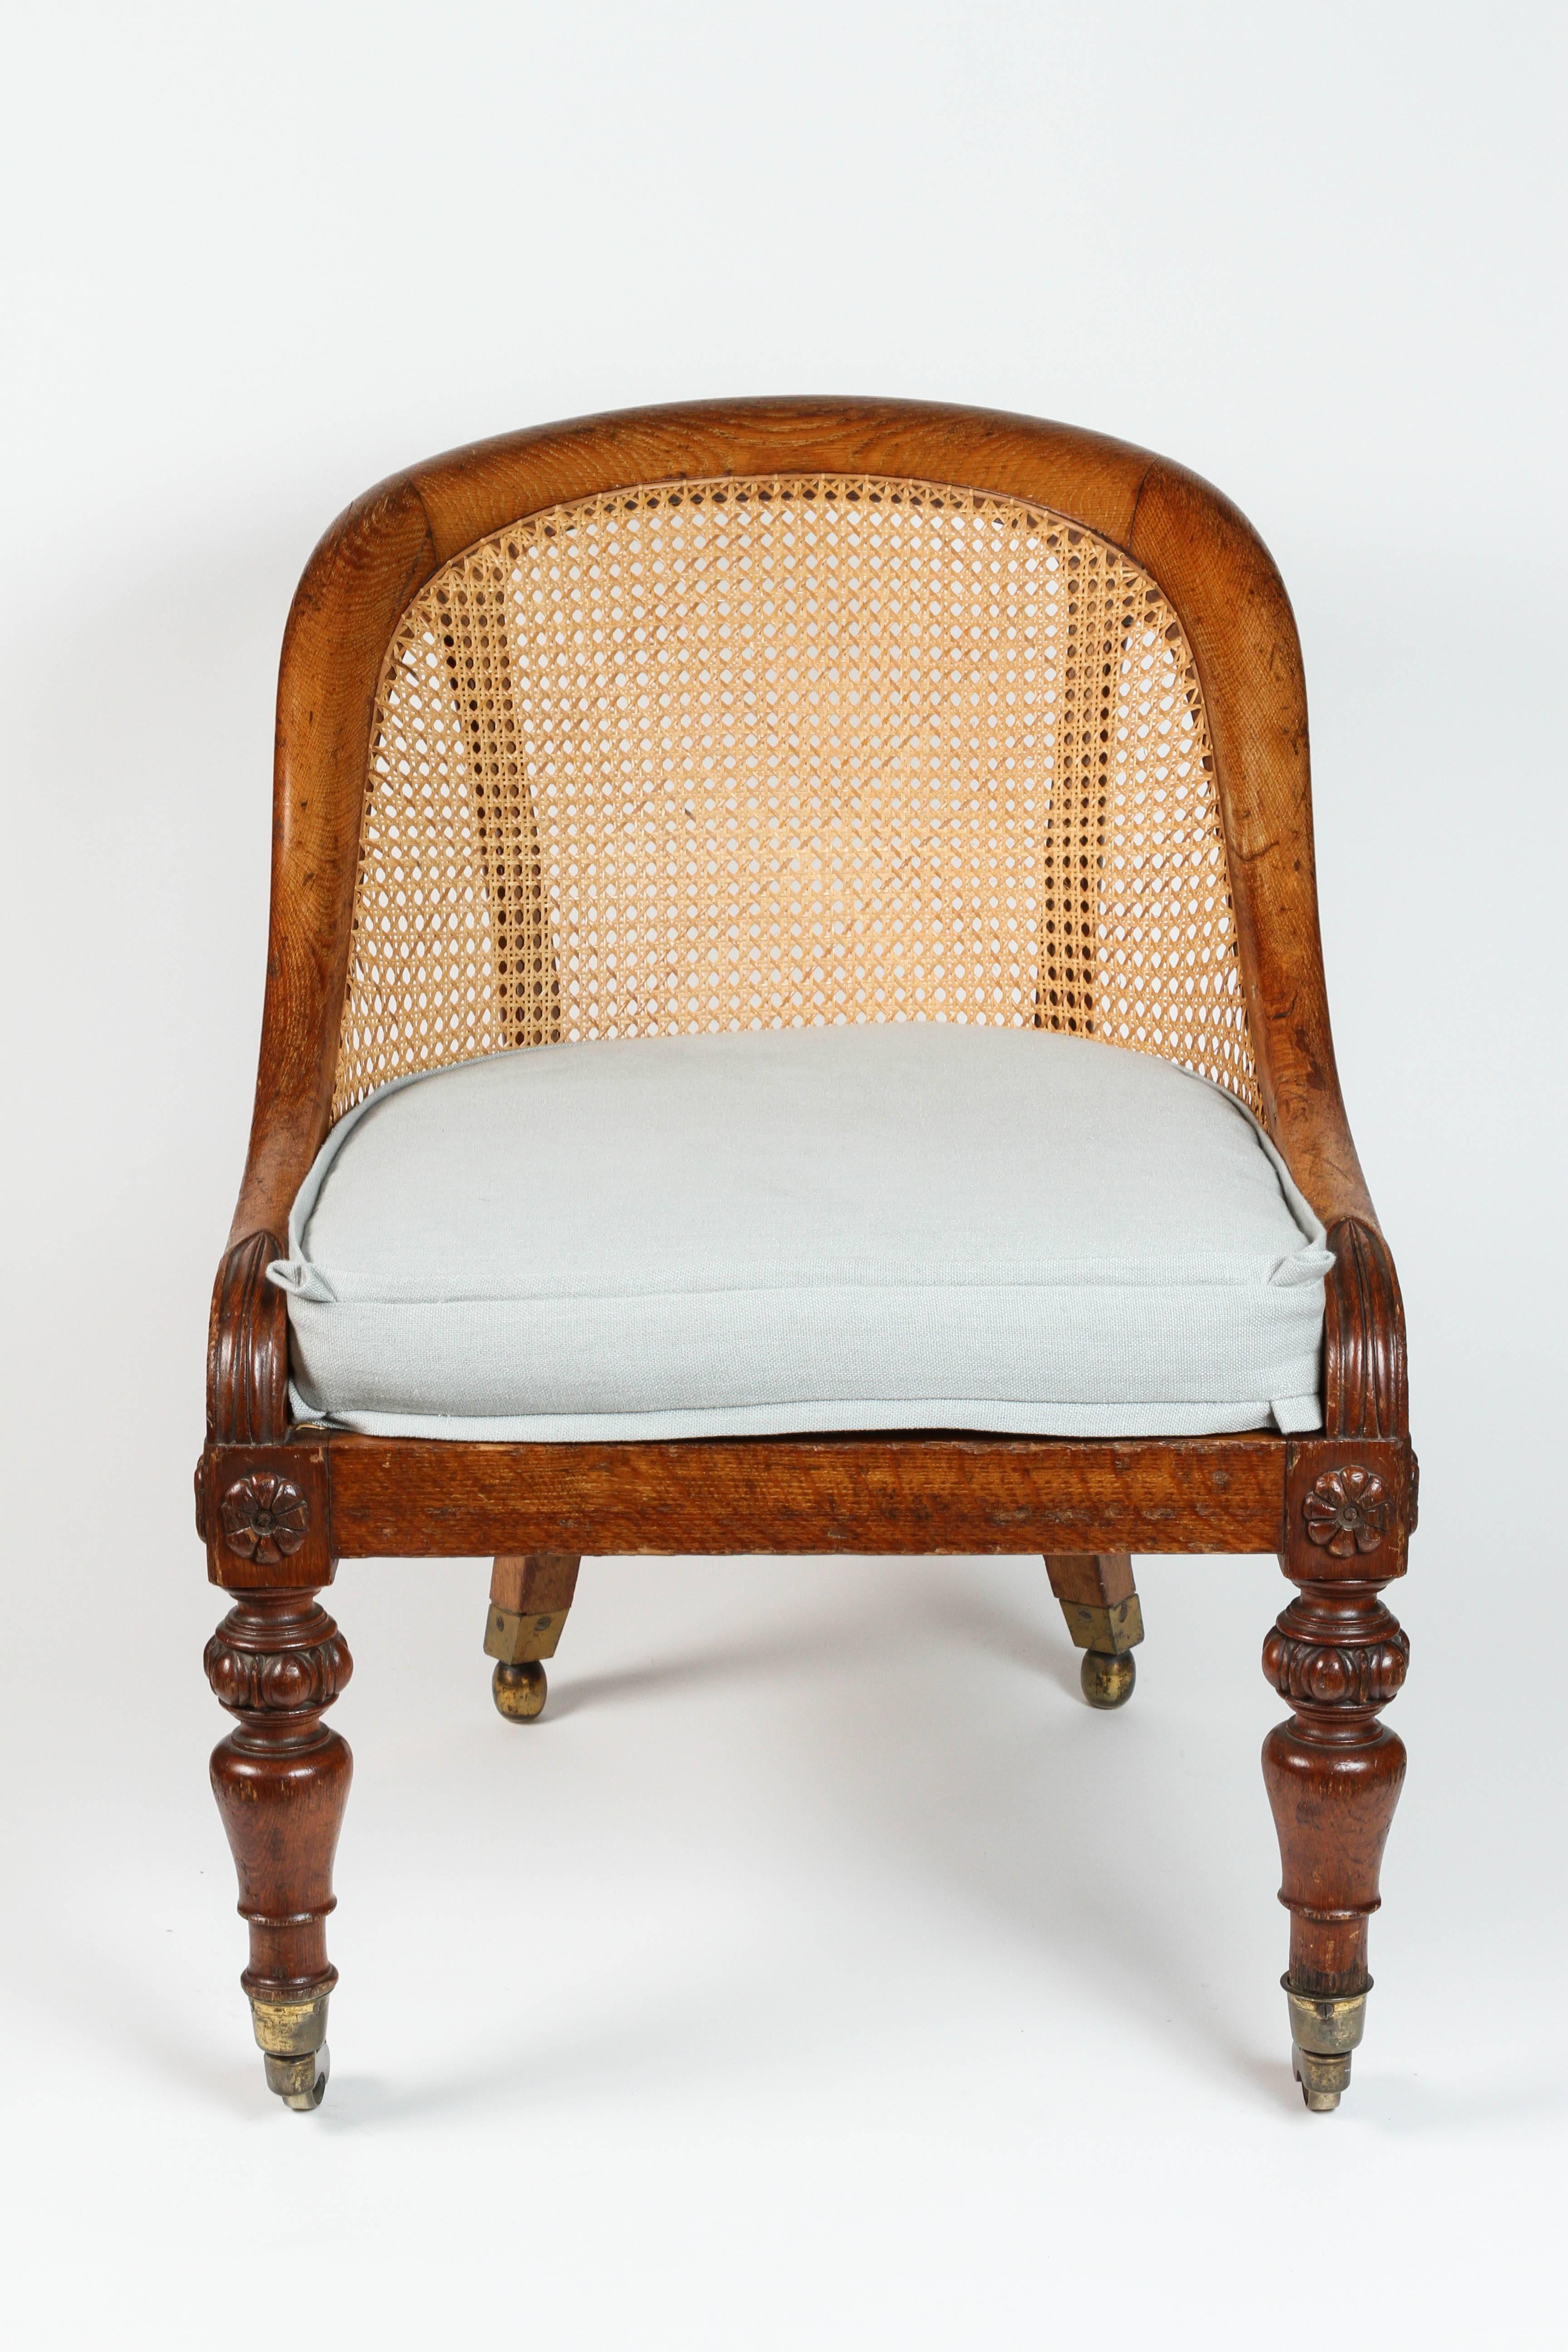 A handsome pair of English caned spoon-back chairs that date from the 1830s. They have elaborately carved front legs, and curved back legs that are on casters. The seat cushion is newly upholstered in a nest egg blue linen fabric.